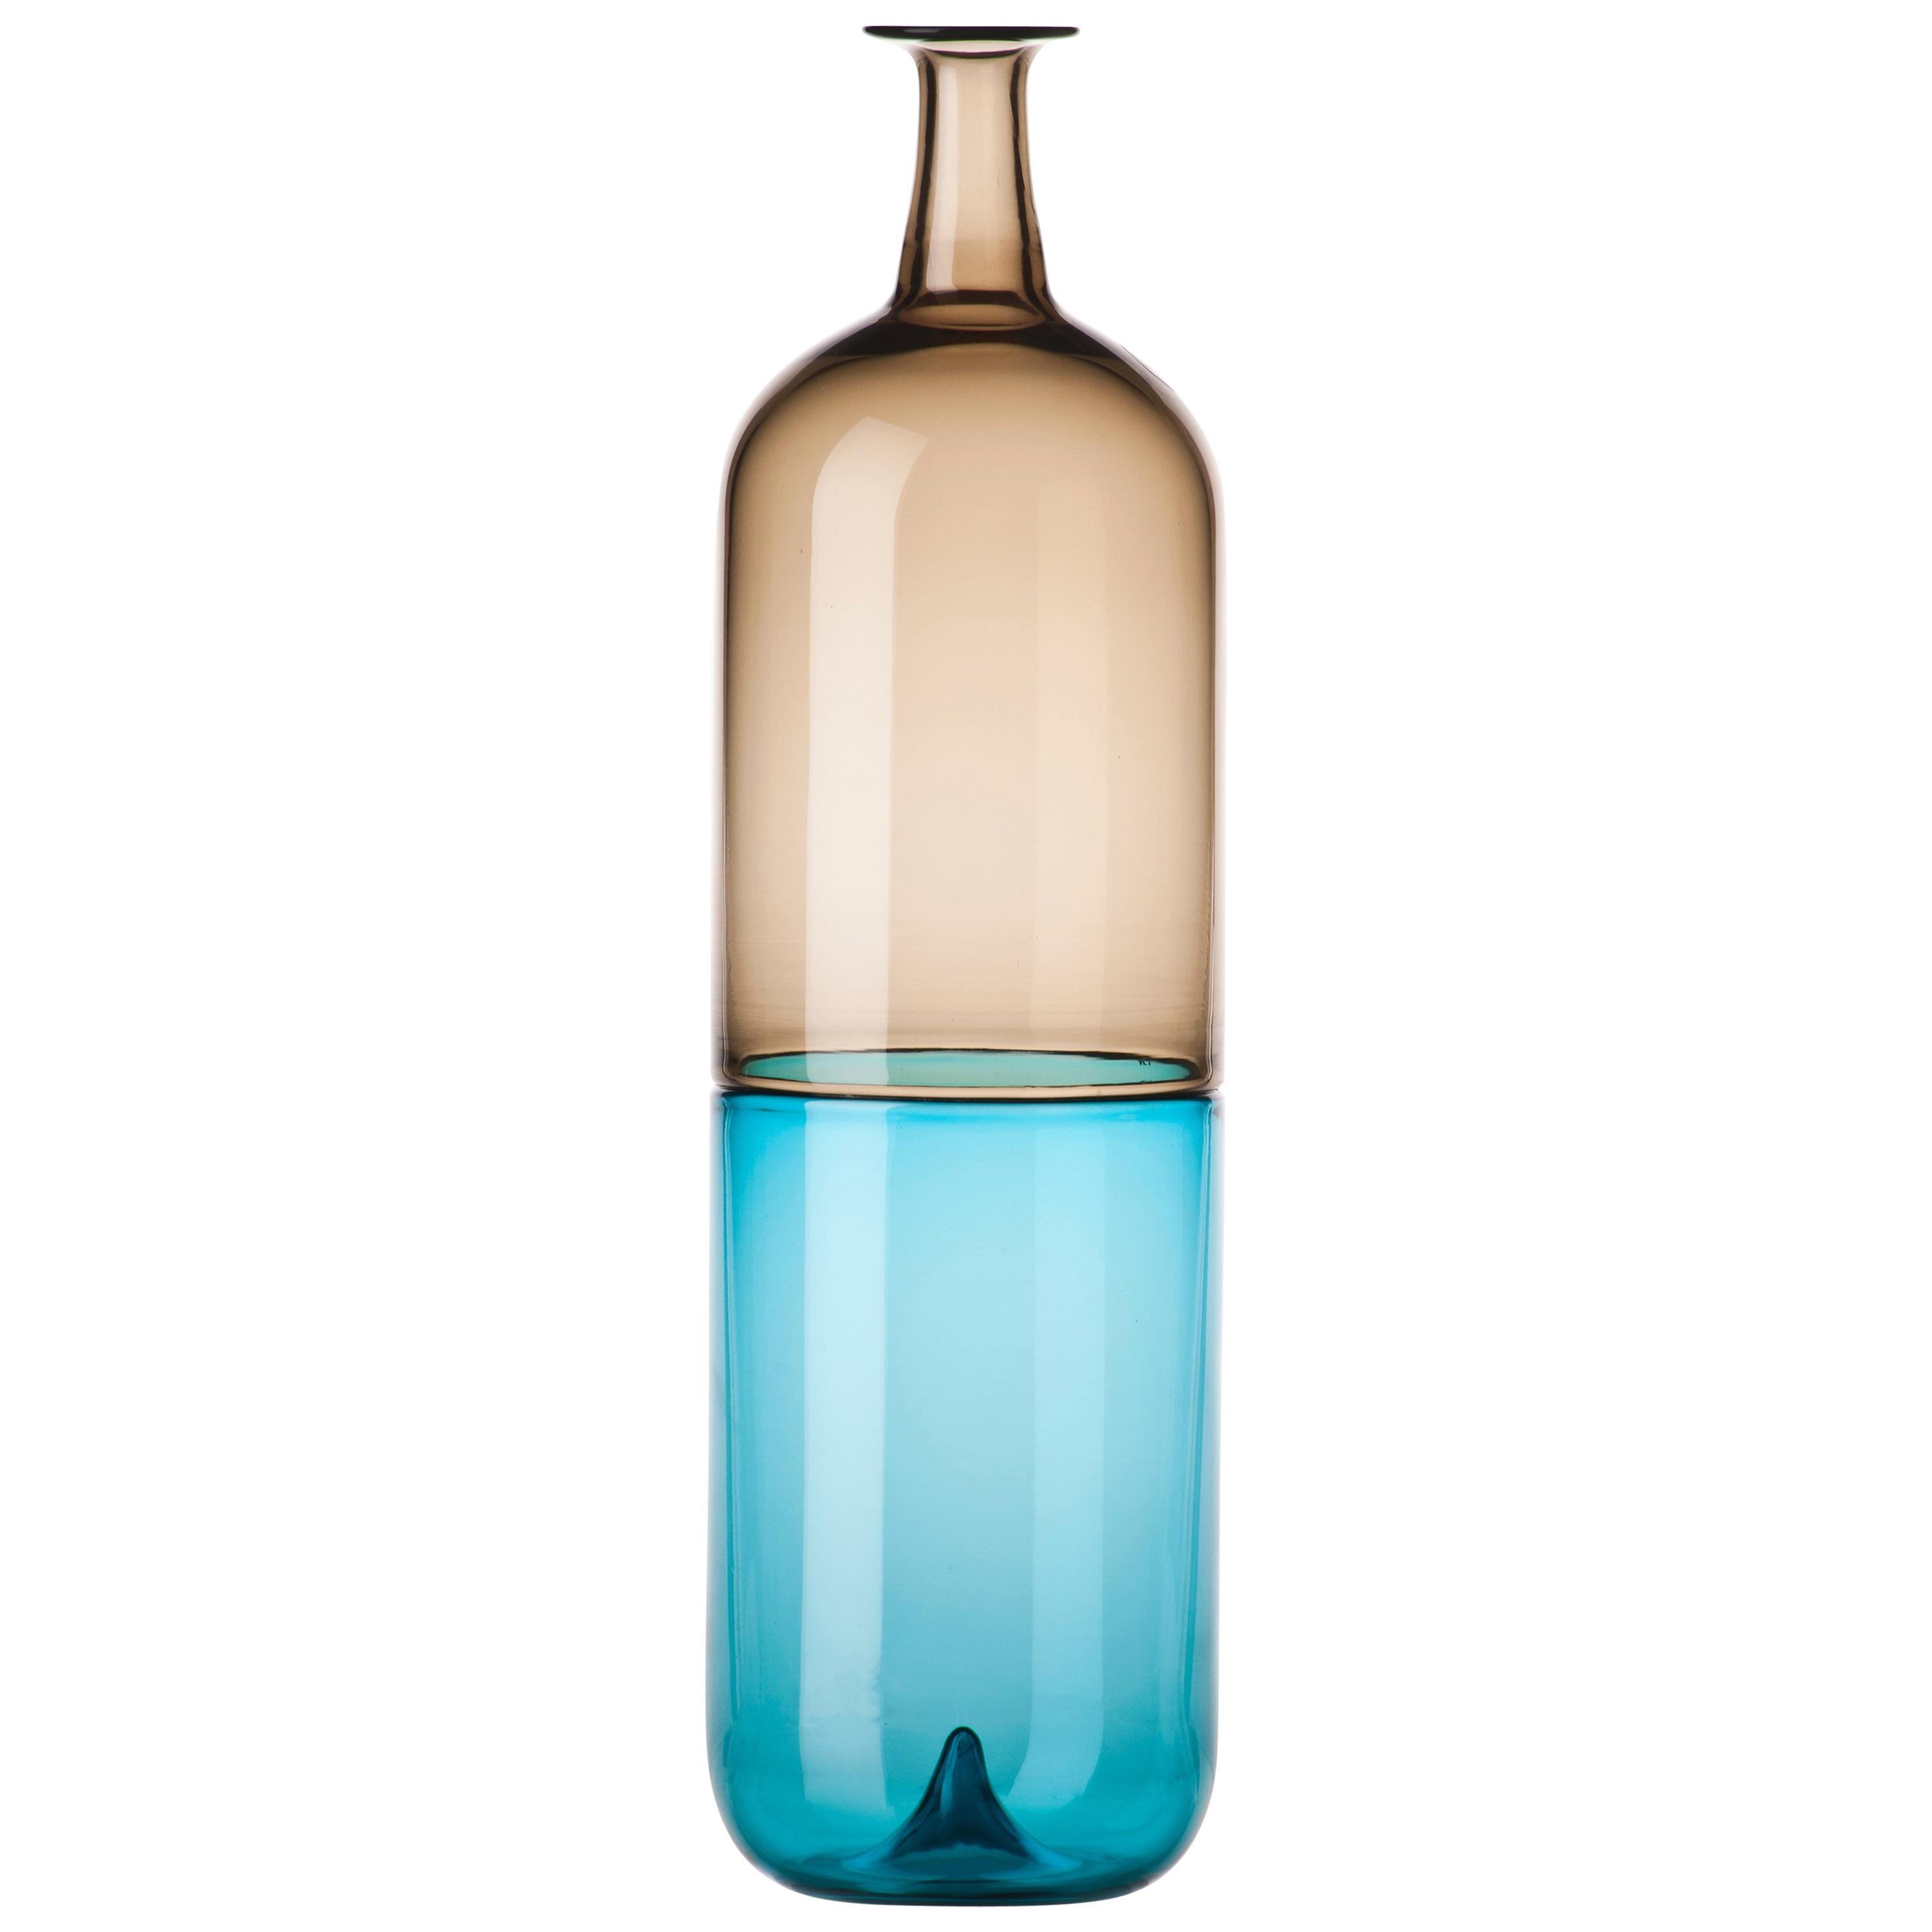 Venini Bolle Tall Glass Vase in Grey and Blue-Green by Tapio Wirkkala